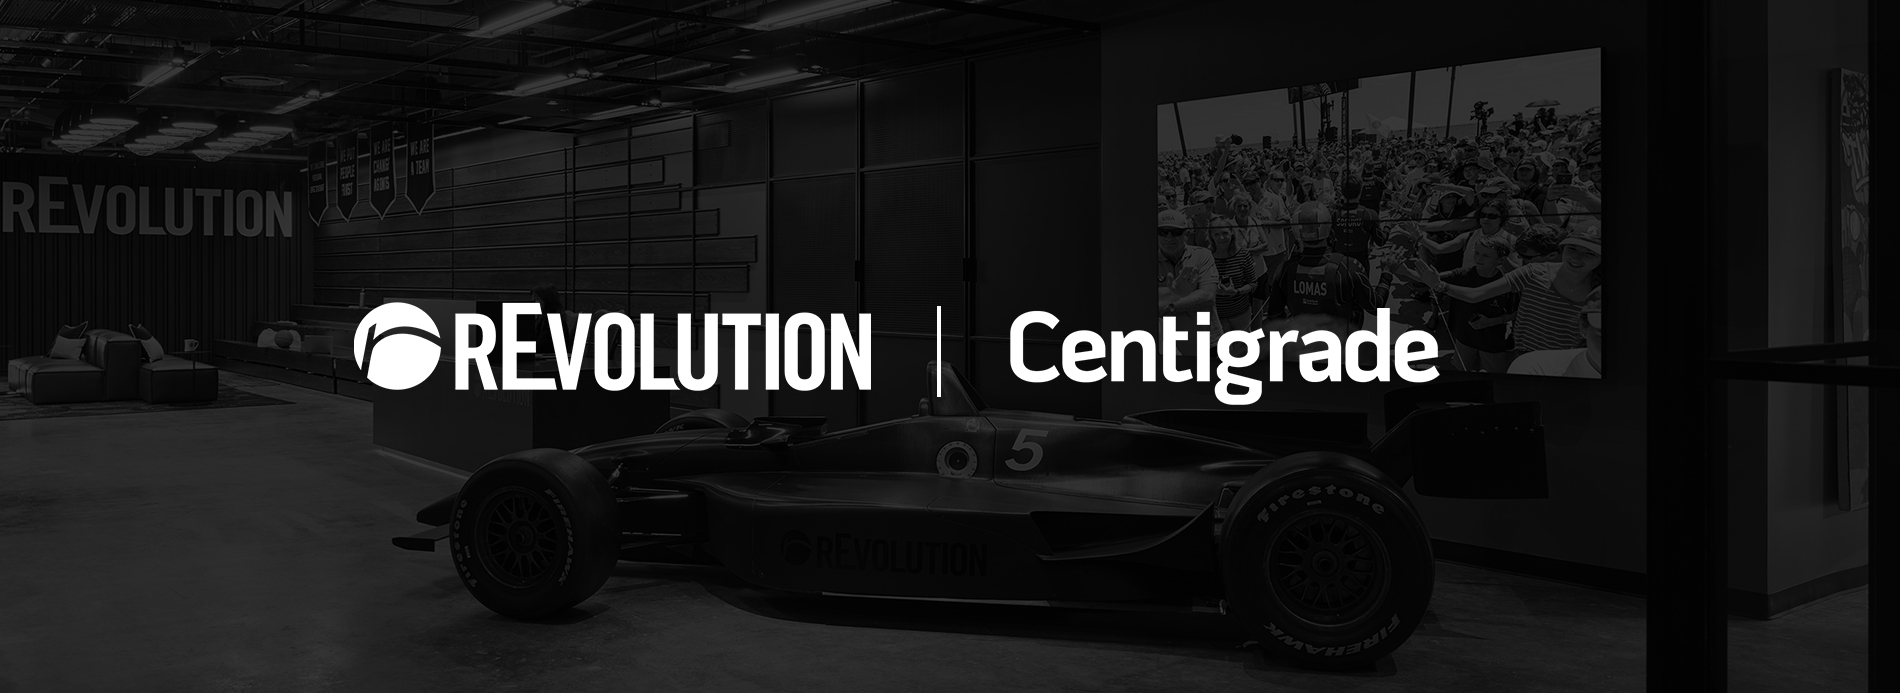 rEvolution Acquires Centigrade Inc. to Broaden Industry Expertise